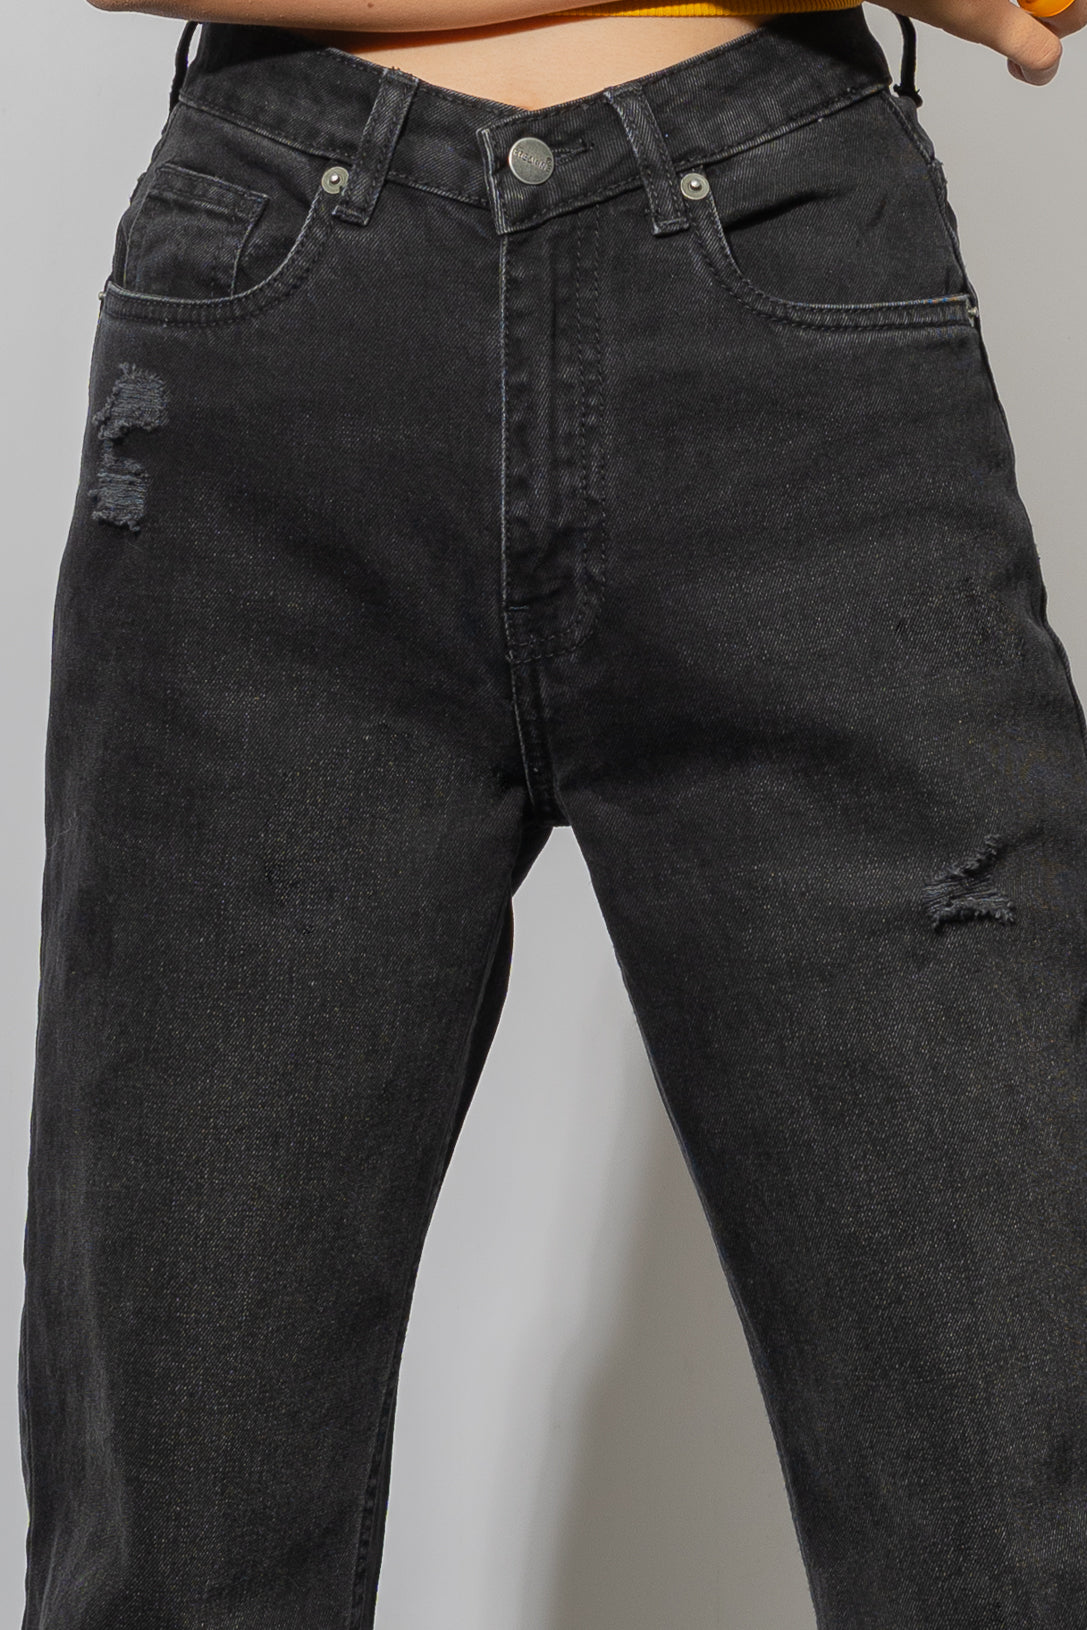 CHARCOAL BLACK DISTRESSED BOOTCUT